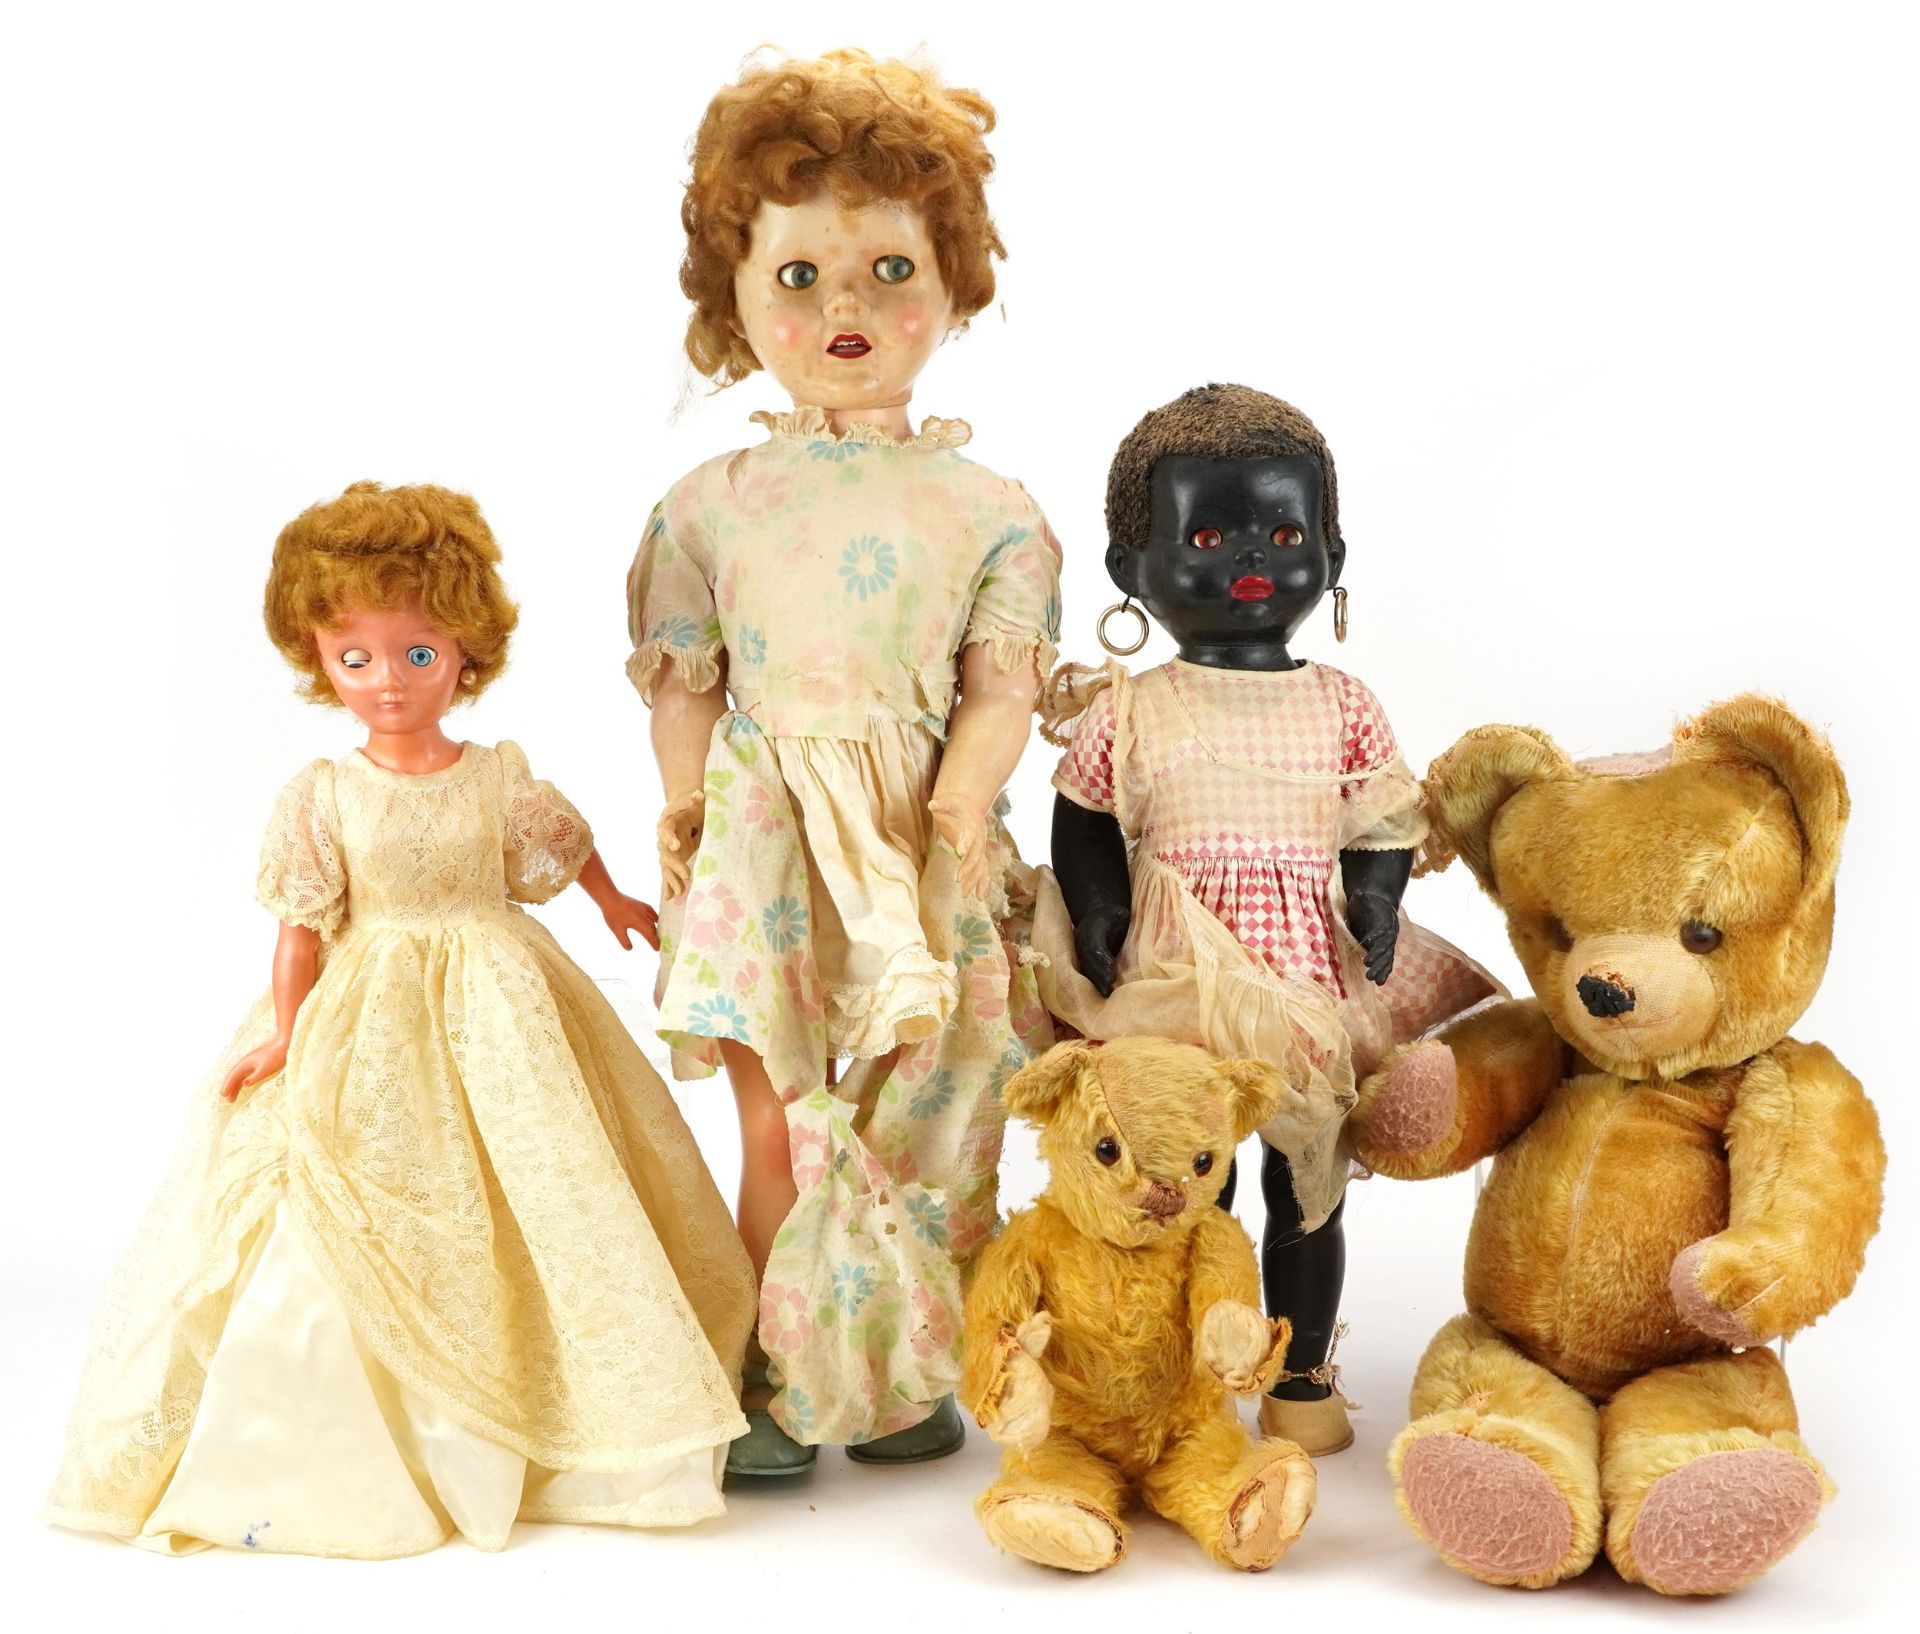 Three vintage dolls including a 28 inch Pedigree example and two golden teddy bears with jointed